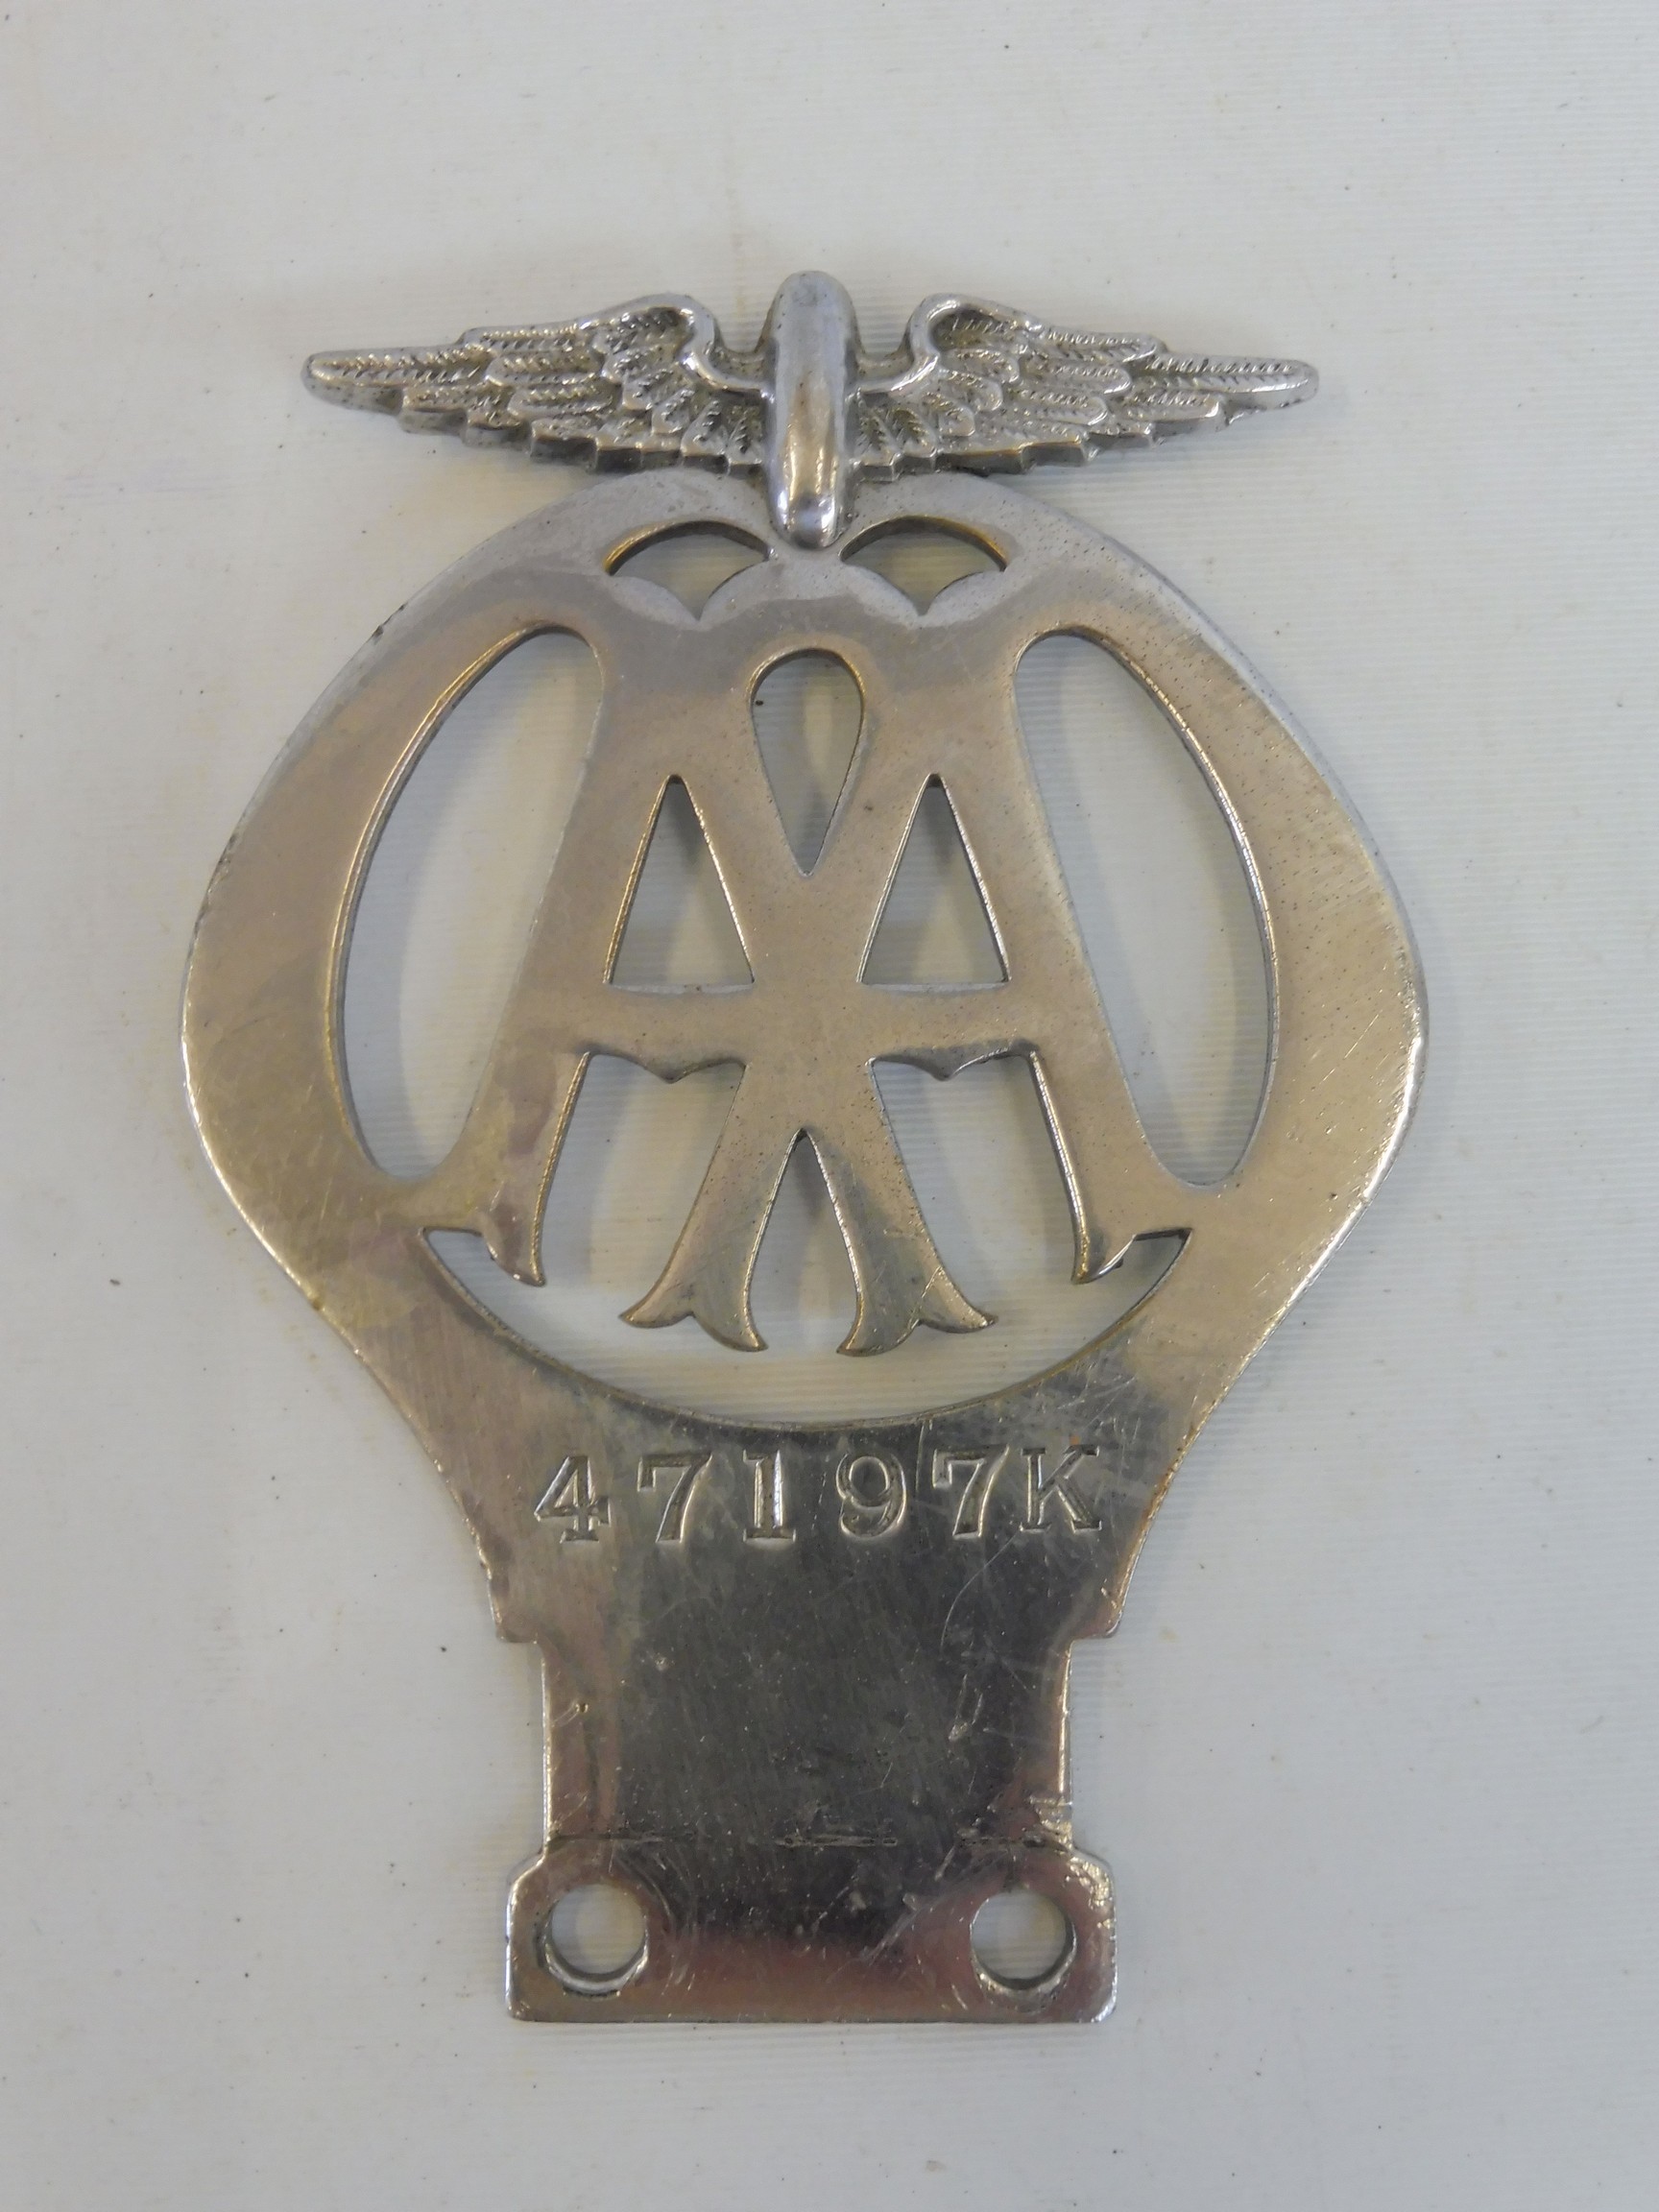 An AA motorcycle badge type 2 stamped 47197K, chrome plated brass.